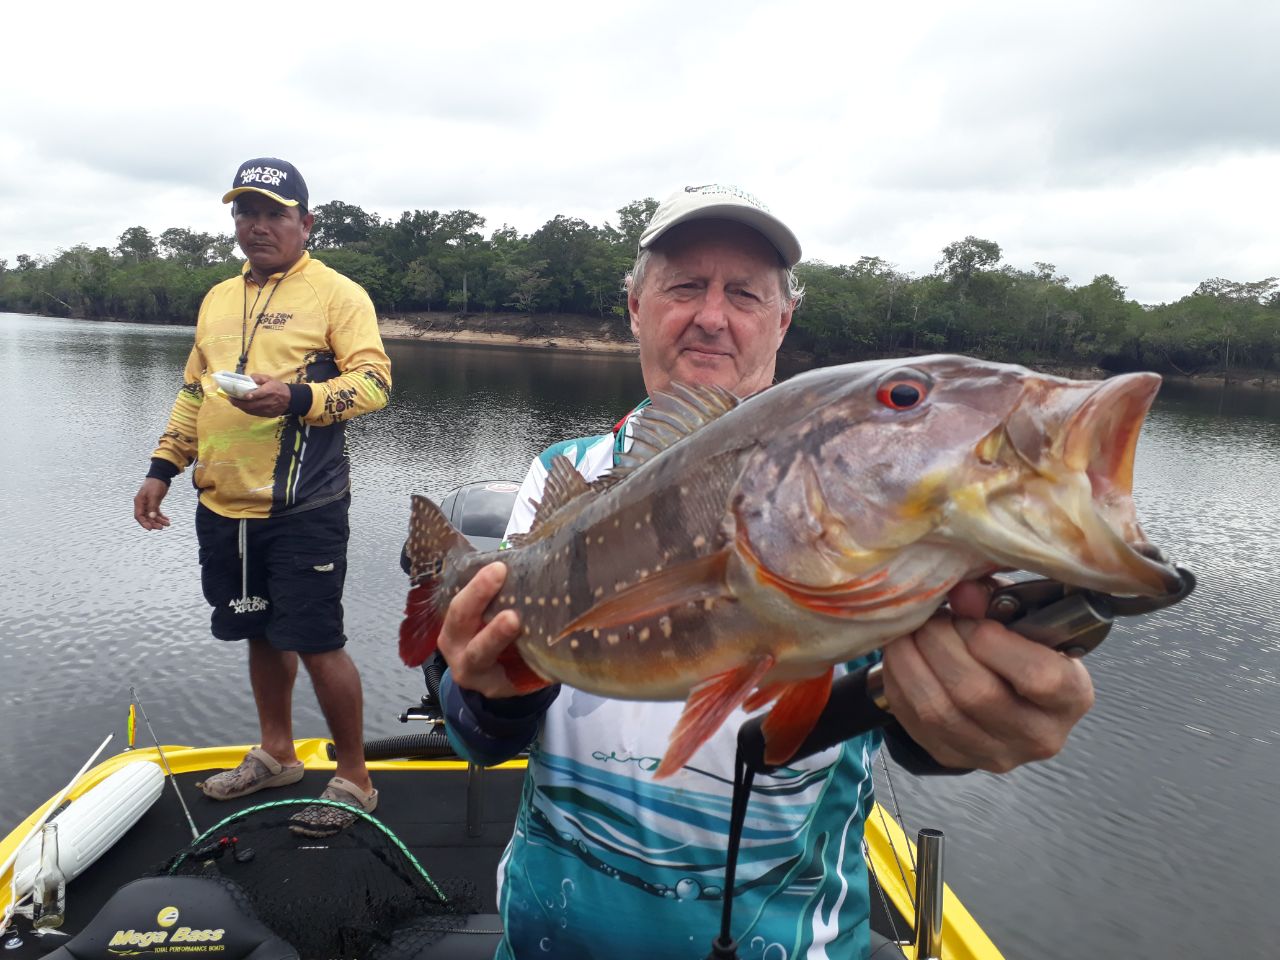 Fisherman in a cap showing a beautiful peacock bass he caught on Amazon Xplor wiht the fihing guifd in the back